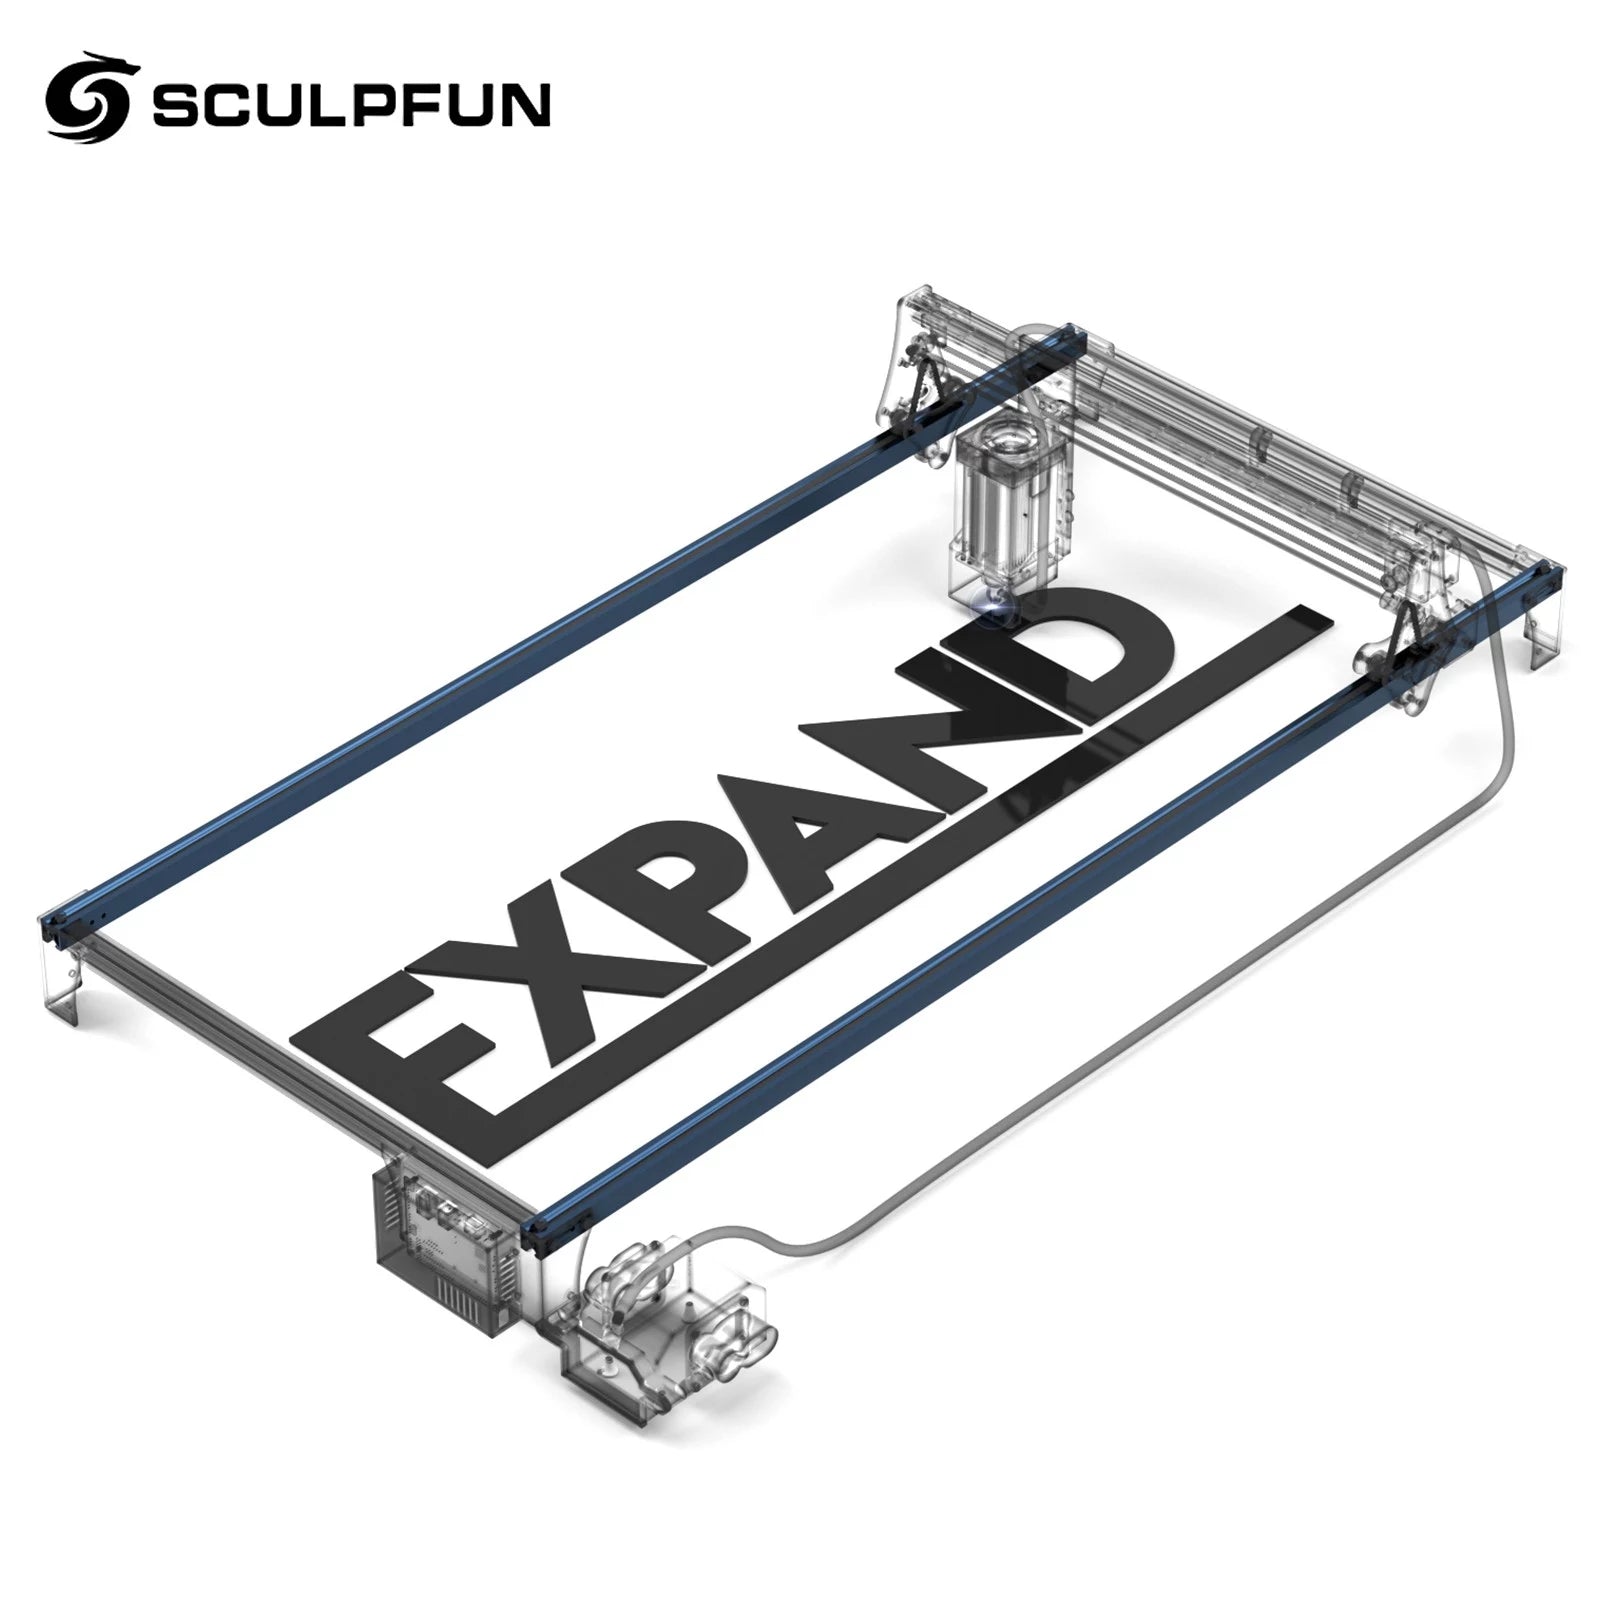 SCULPFUN Y Axis Expansion Kit Only For S30 / S30 Pro/ S30 Pro Max Engr –  VATEH